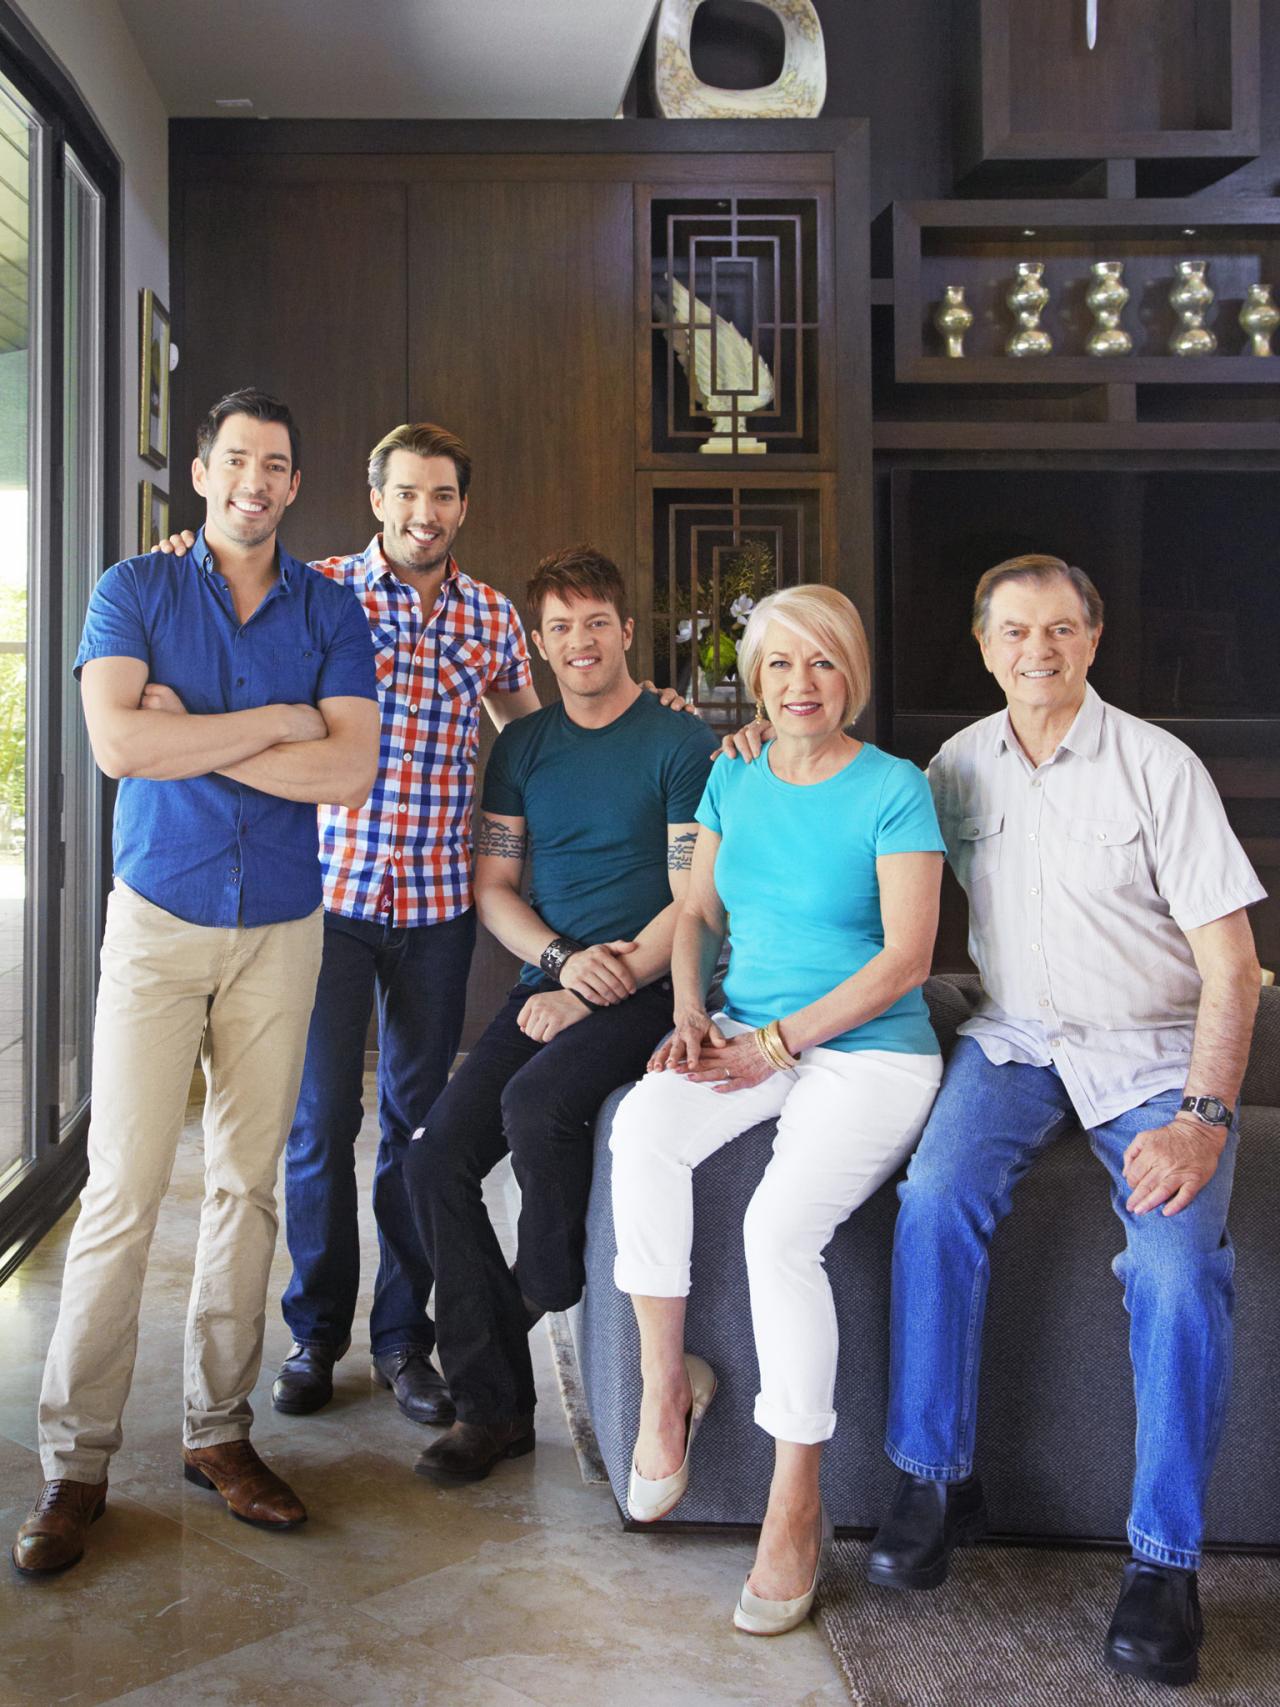  10 Times the Property Brothers Were at Home